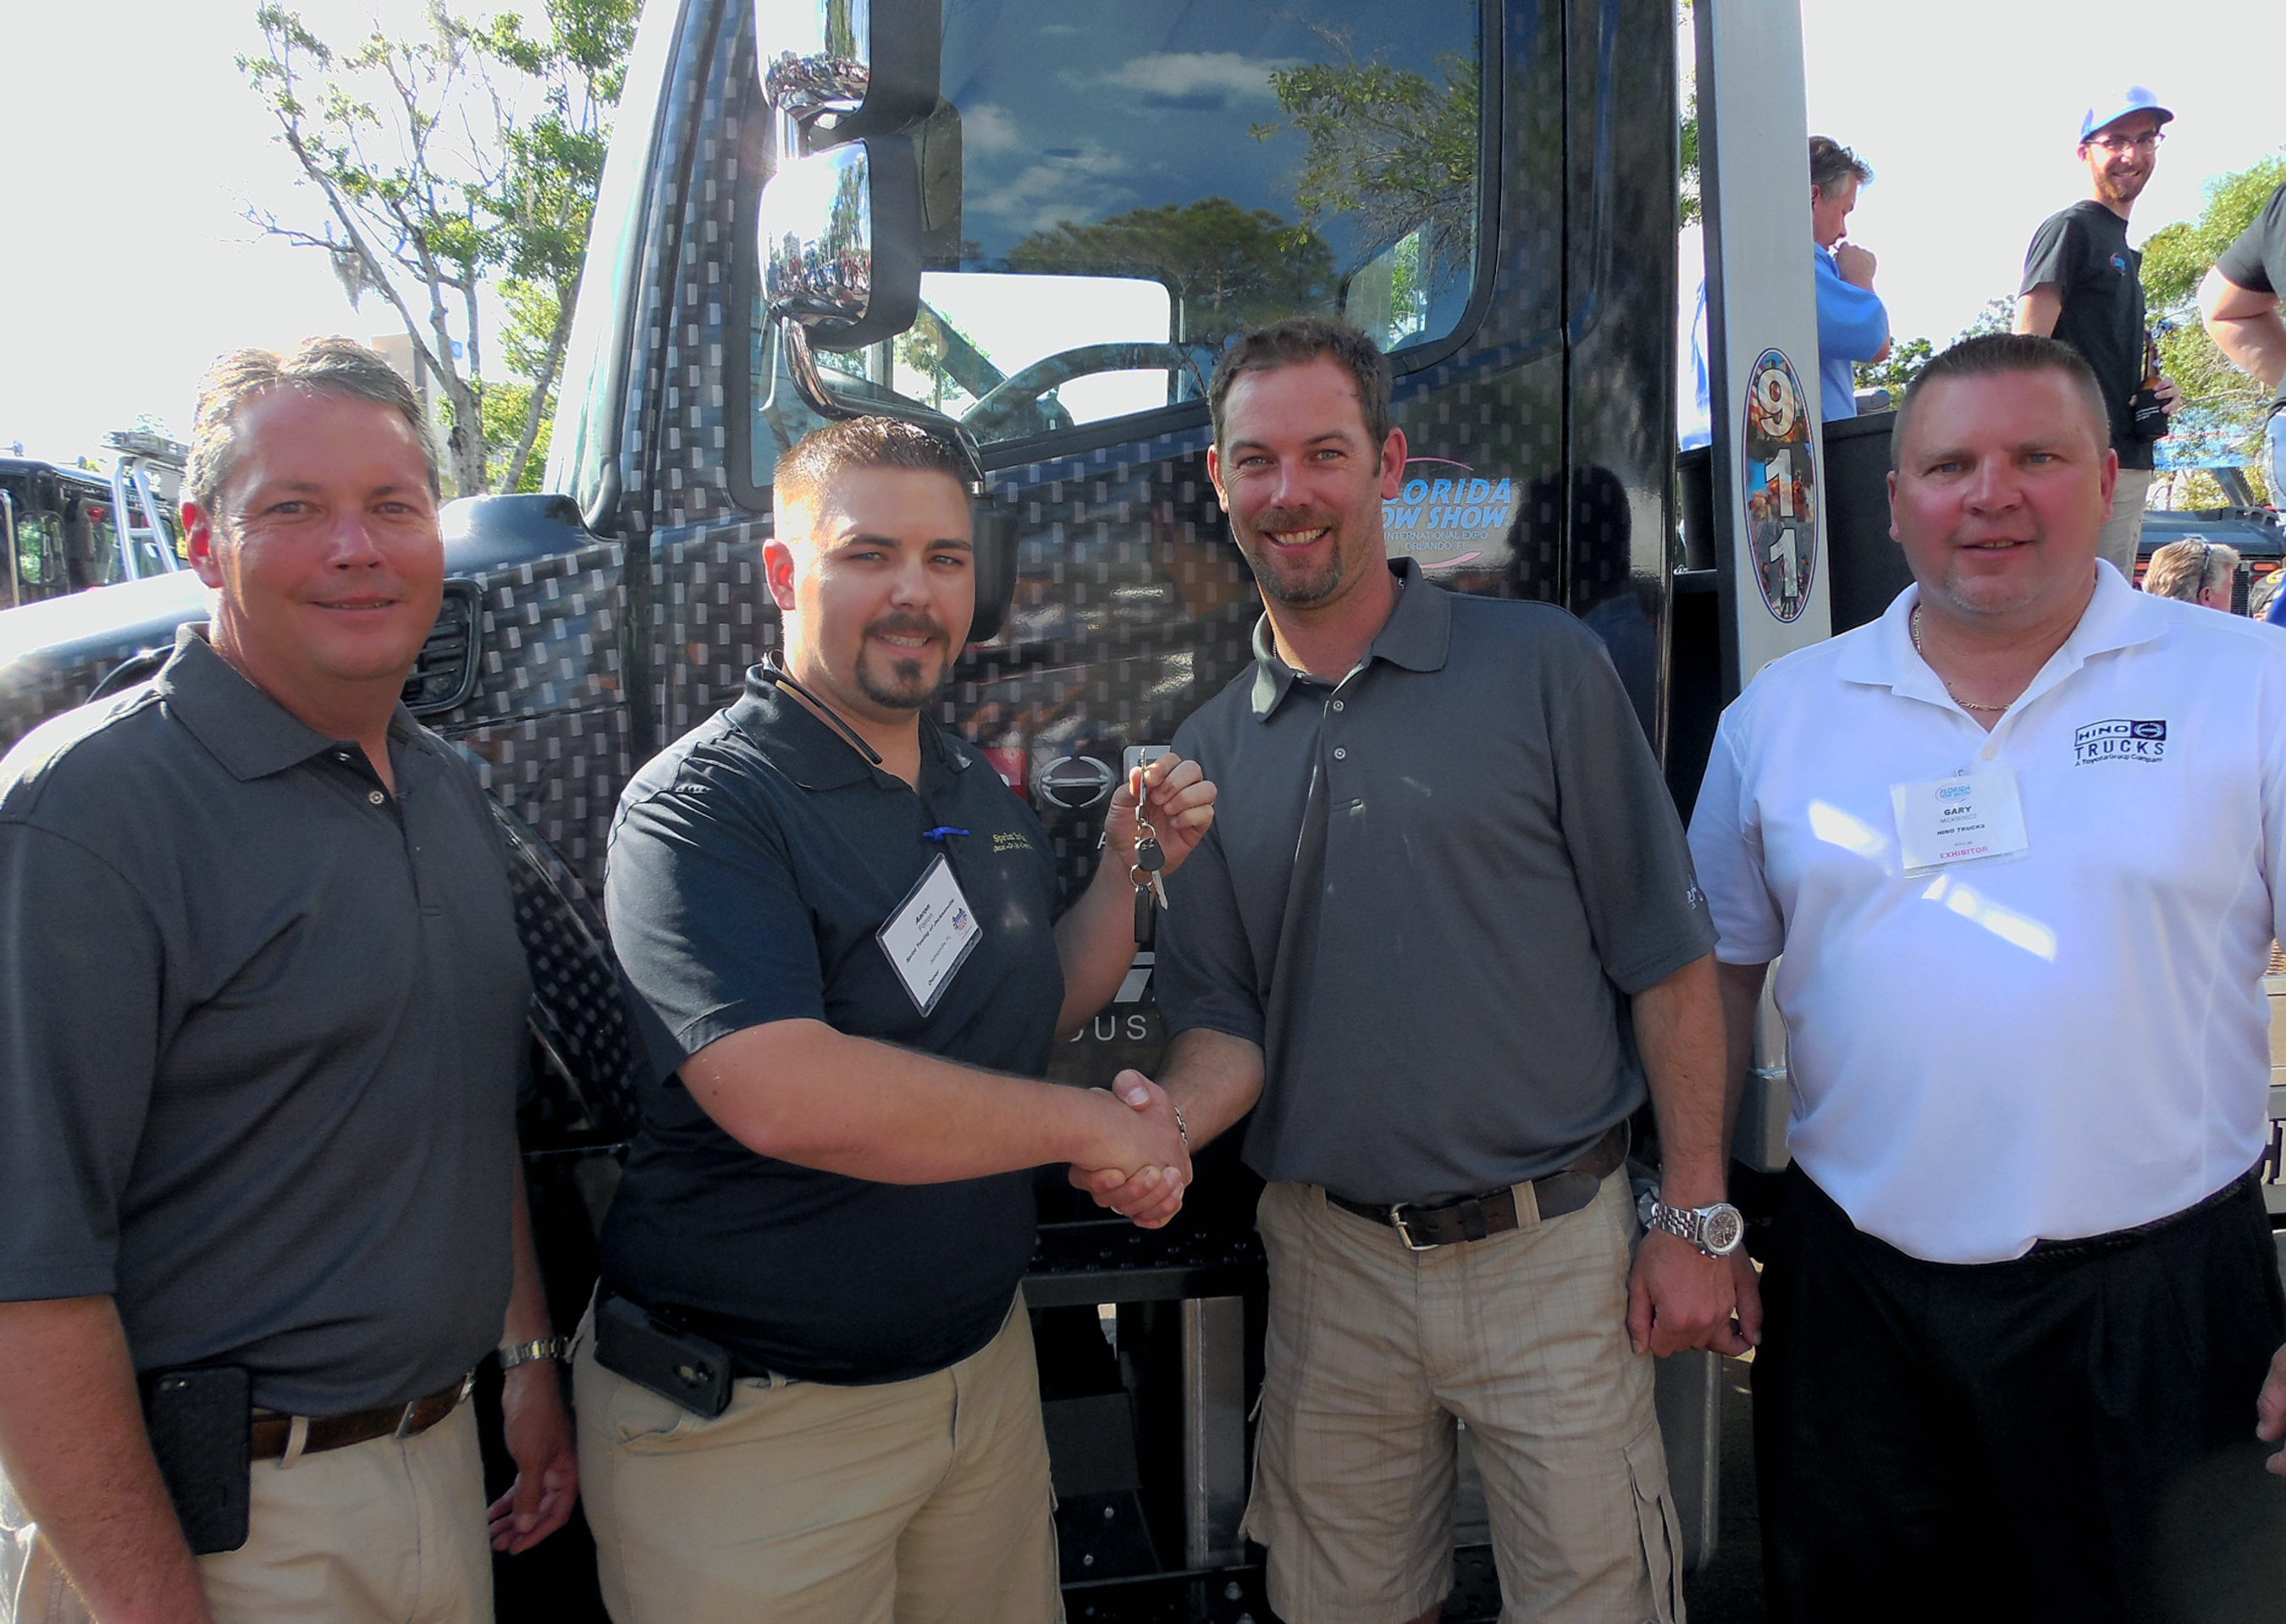 Pictured from left: Vince Tiano, Vice President of Miller Industries; Aaron Forron; Will Miller, President and Co-CEO of Miller Industries; and Gary Mickiewicz, Vice President, Eastern Region of Hino Trucks. (PRNewsFoto/Hino Trucks )